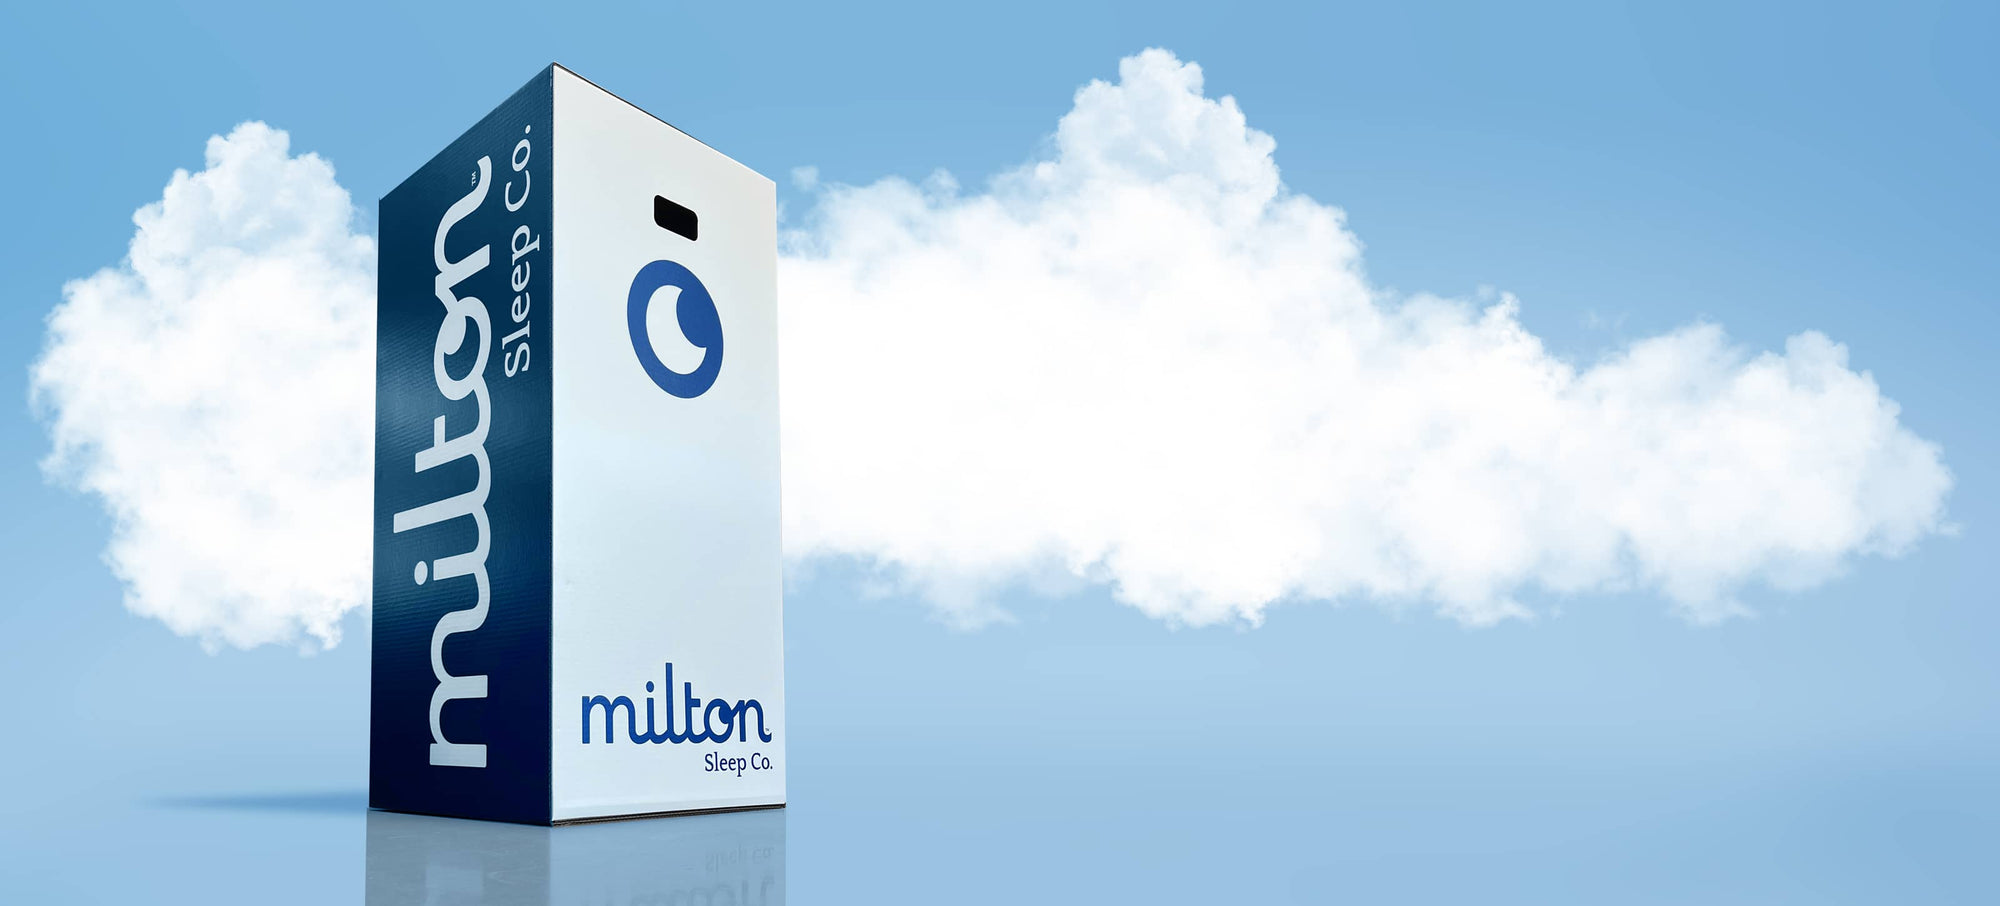 Milton Sleep Co. Box in front of puffy cloud background